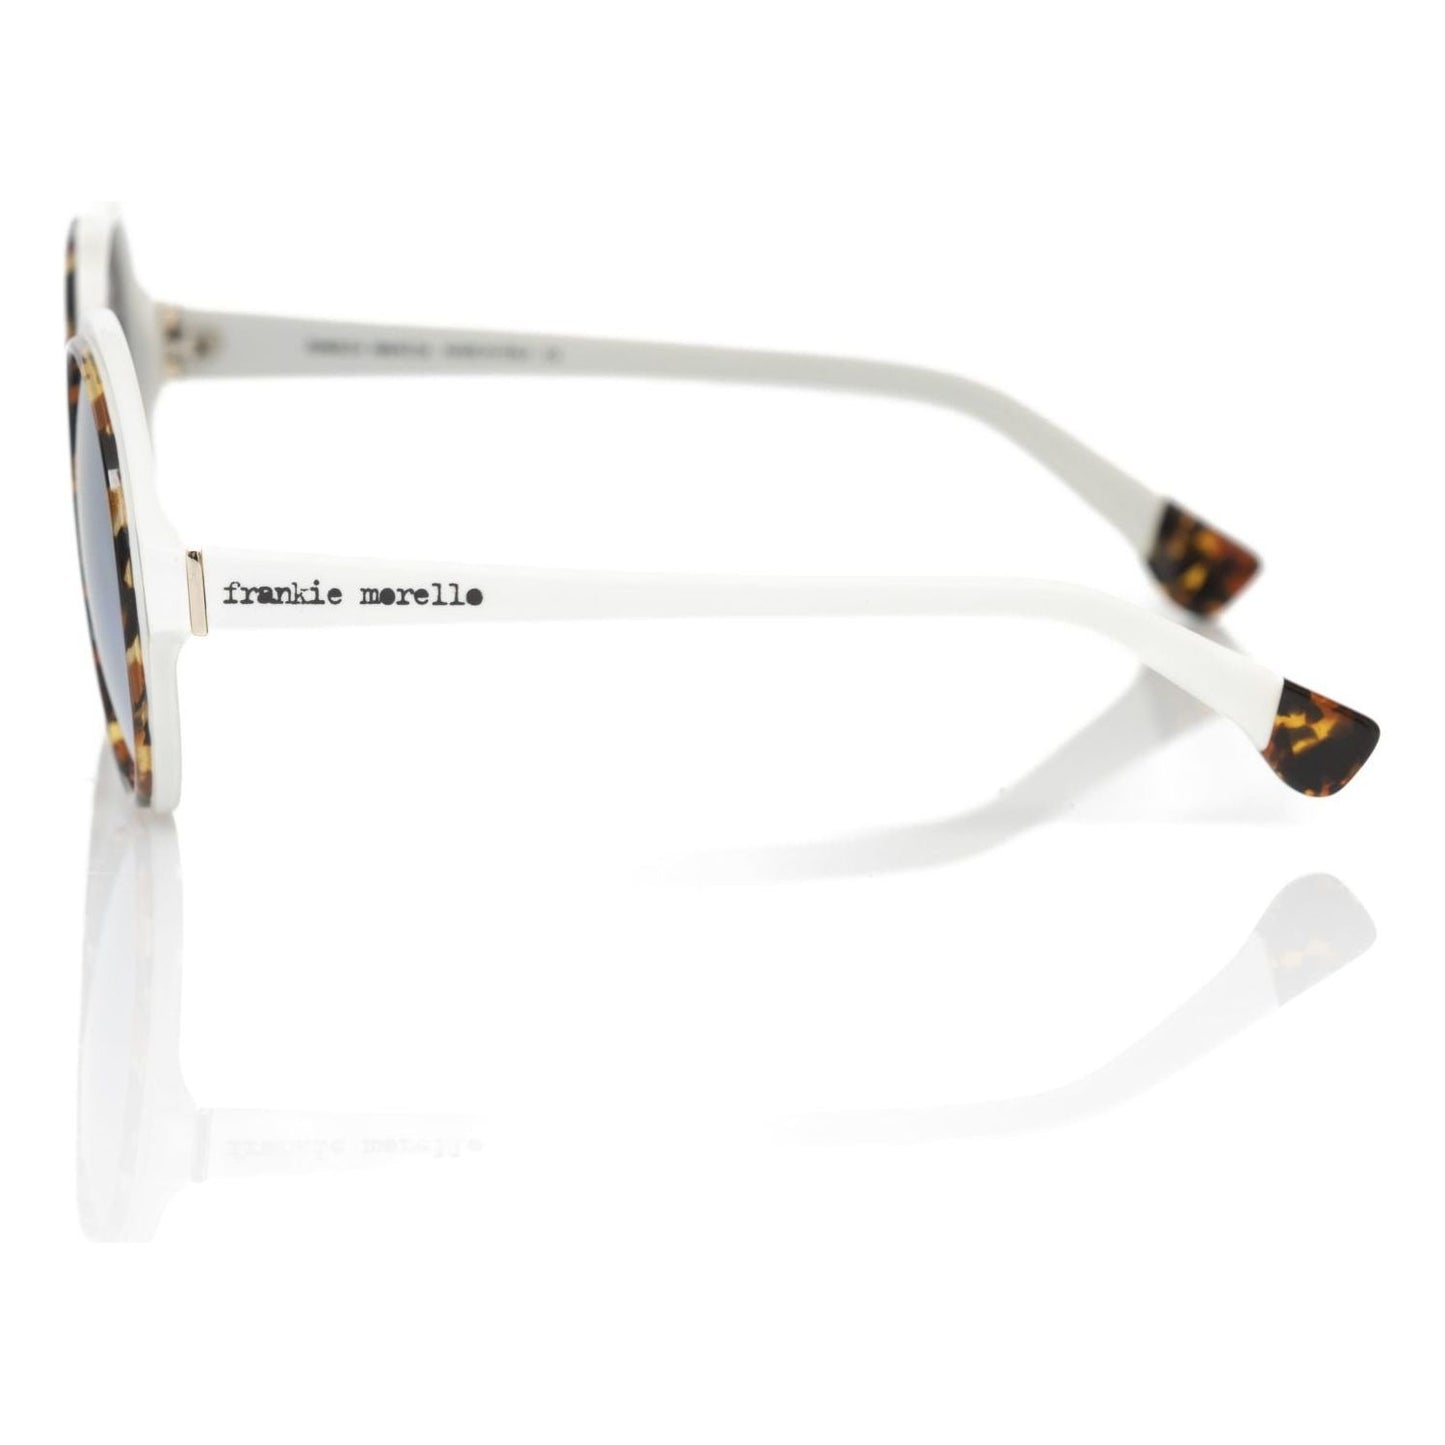 Frankie Morello Chic White Round Sunglasses with Blue Shaded Lens white-acetate-sunglasses-1 product-22074-896890460-43-scaled-9cb99d4f-d52.jpg